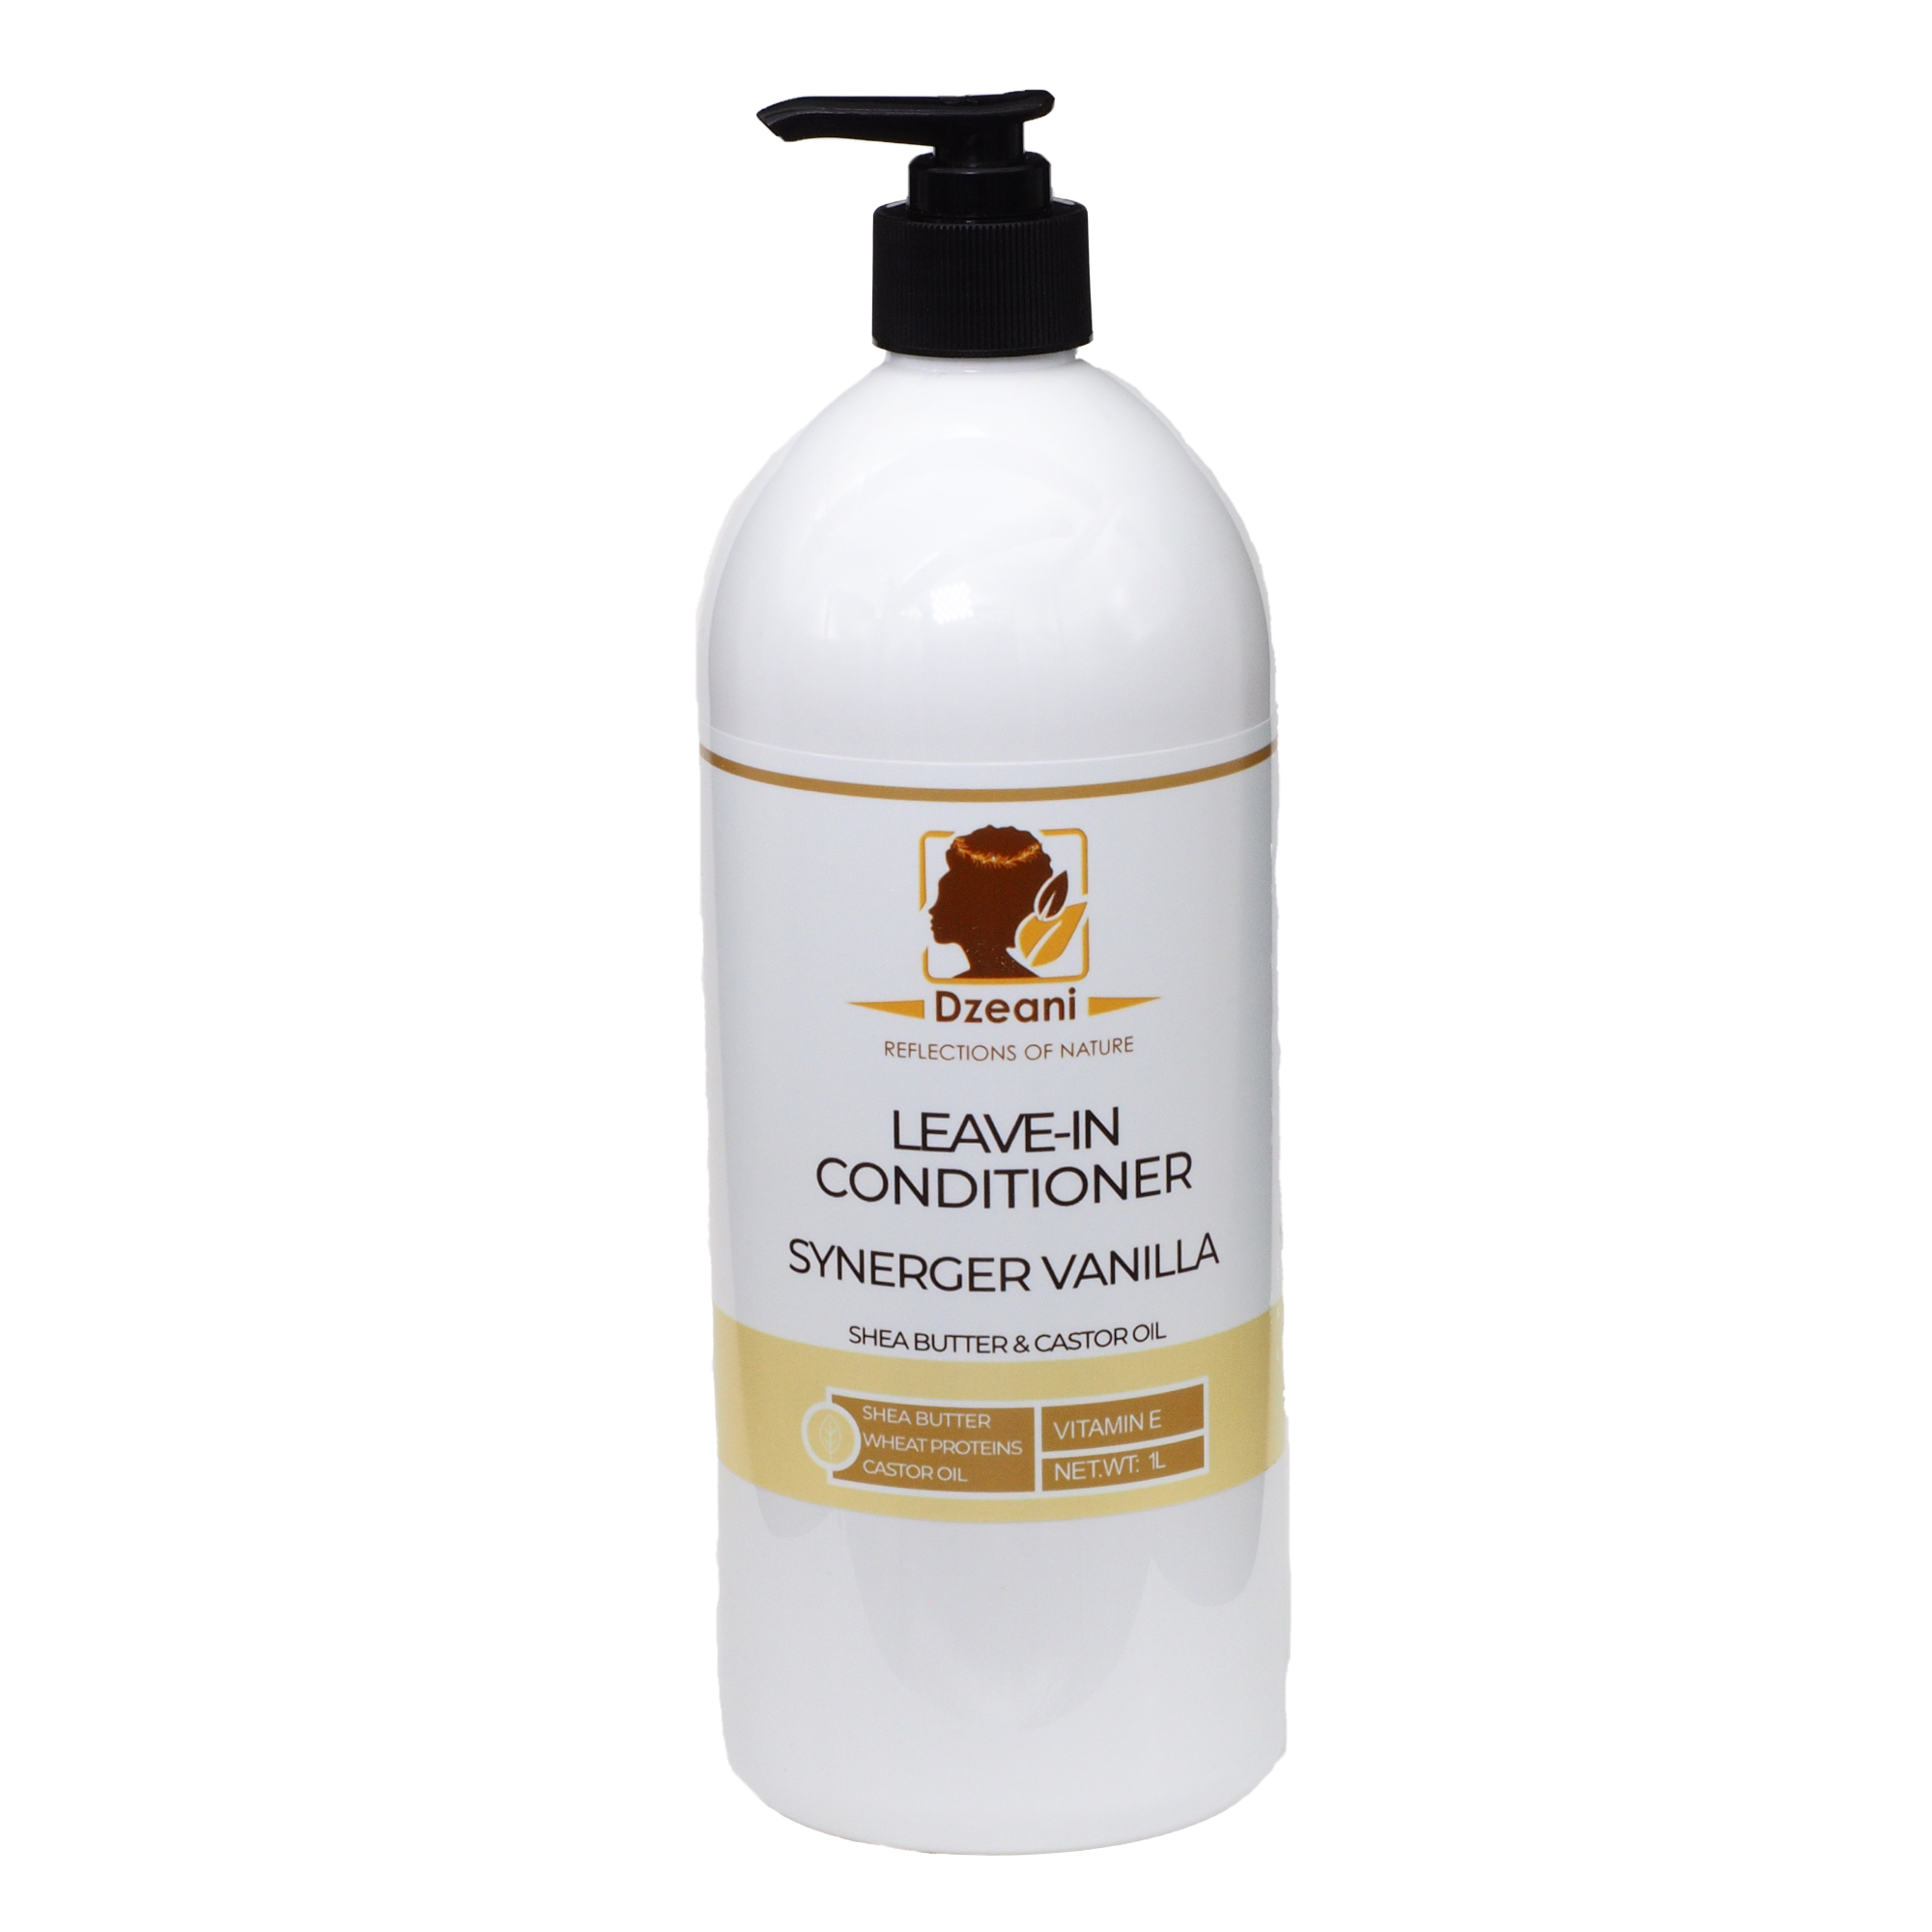 Conditioner is rich in moisturising Shea Butter, Castor Oil and Hydrolyzed Wheat Protein to help nourish, strengthen and repair dry and damaged hair - Dzeani - 